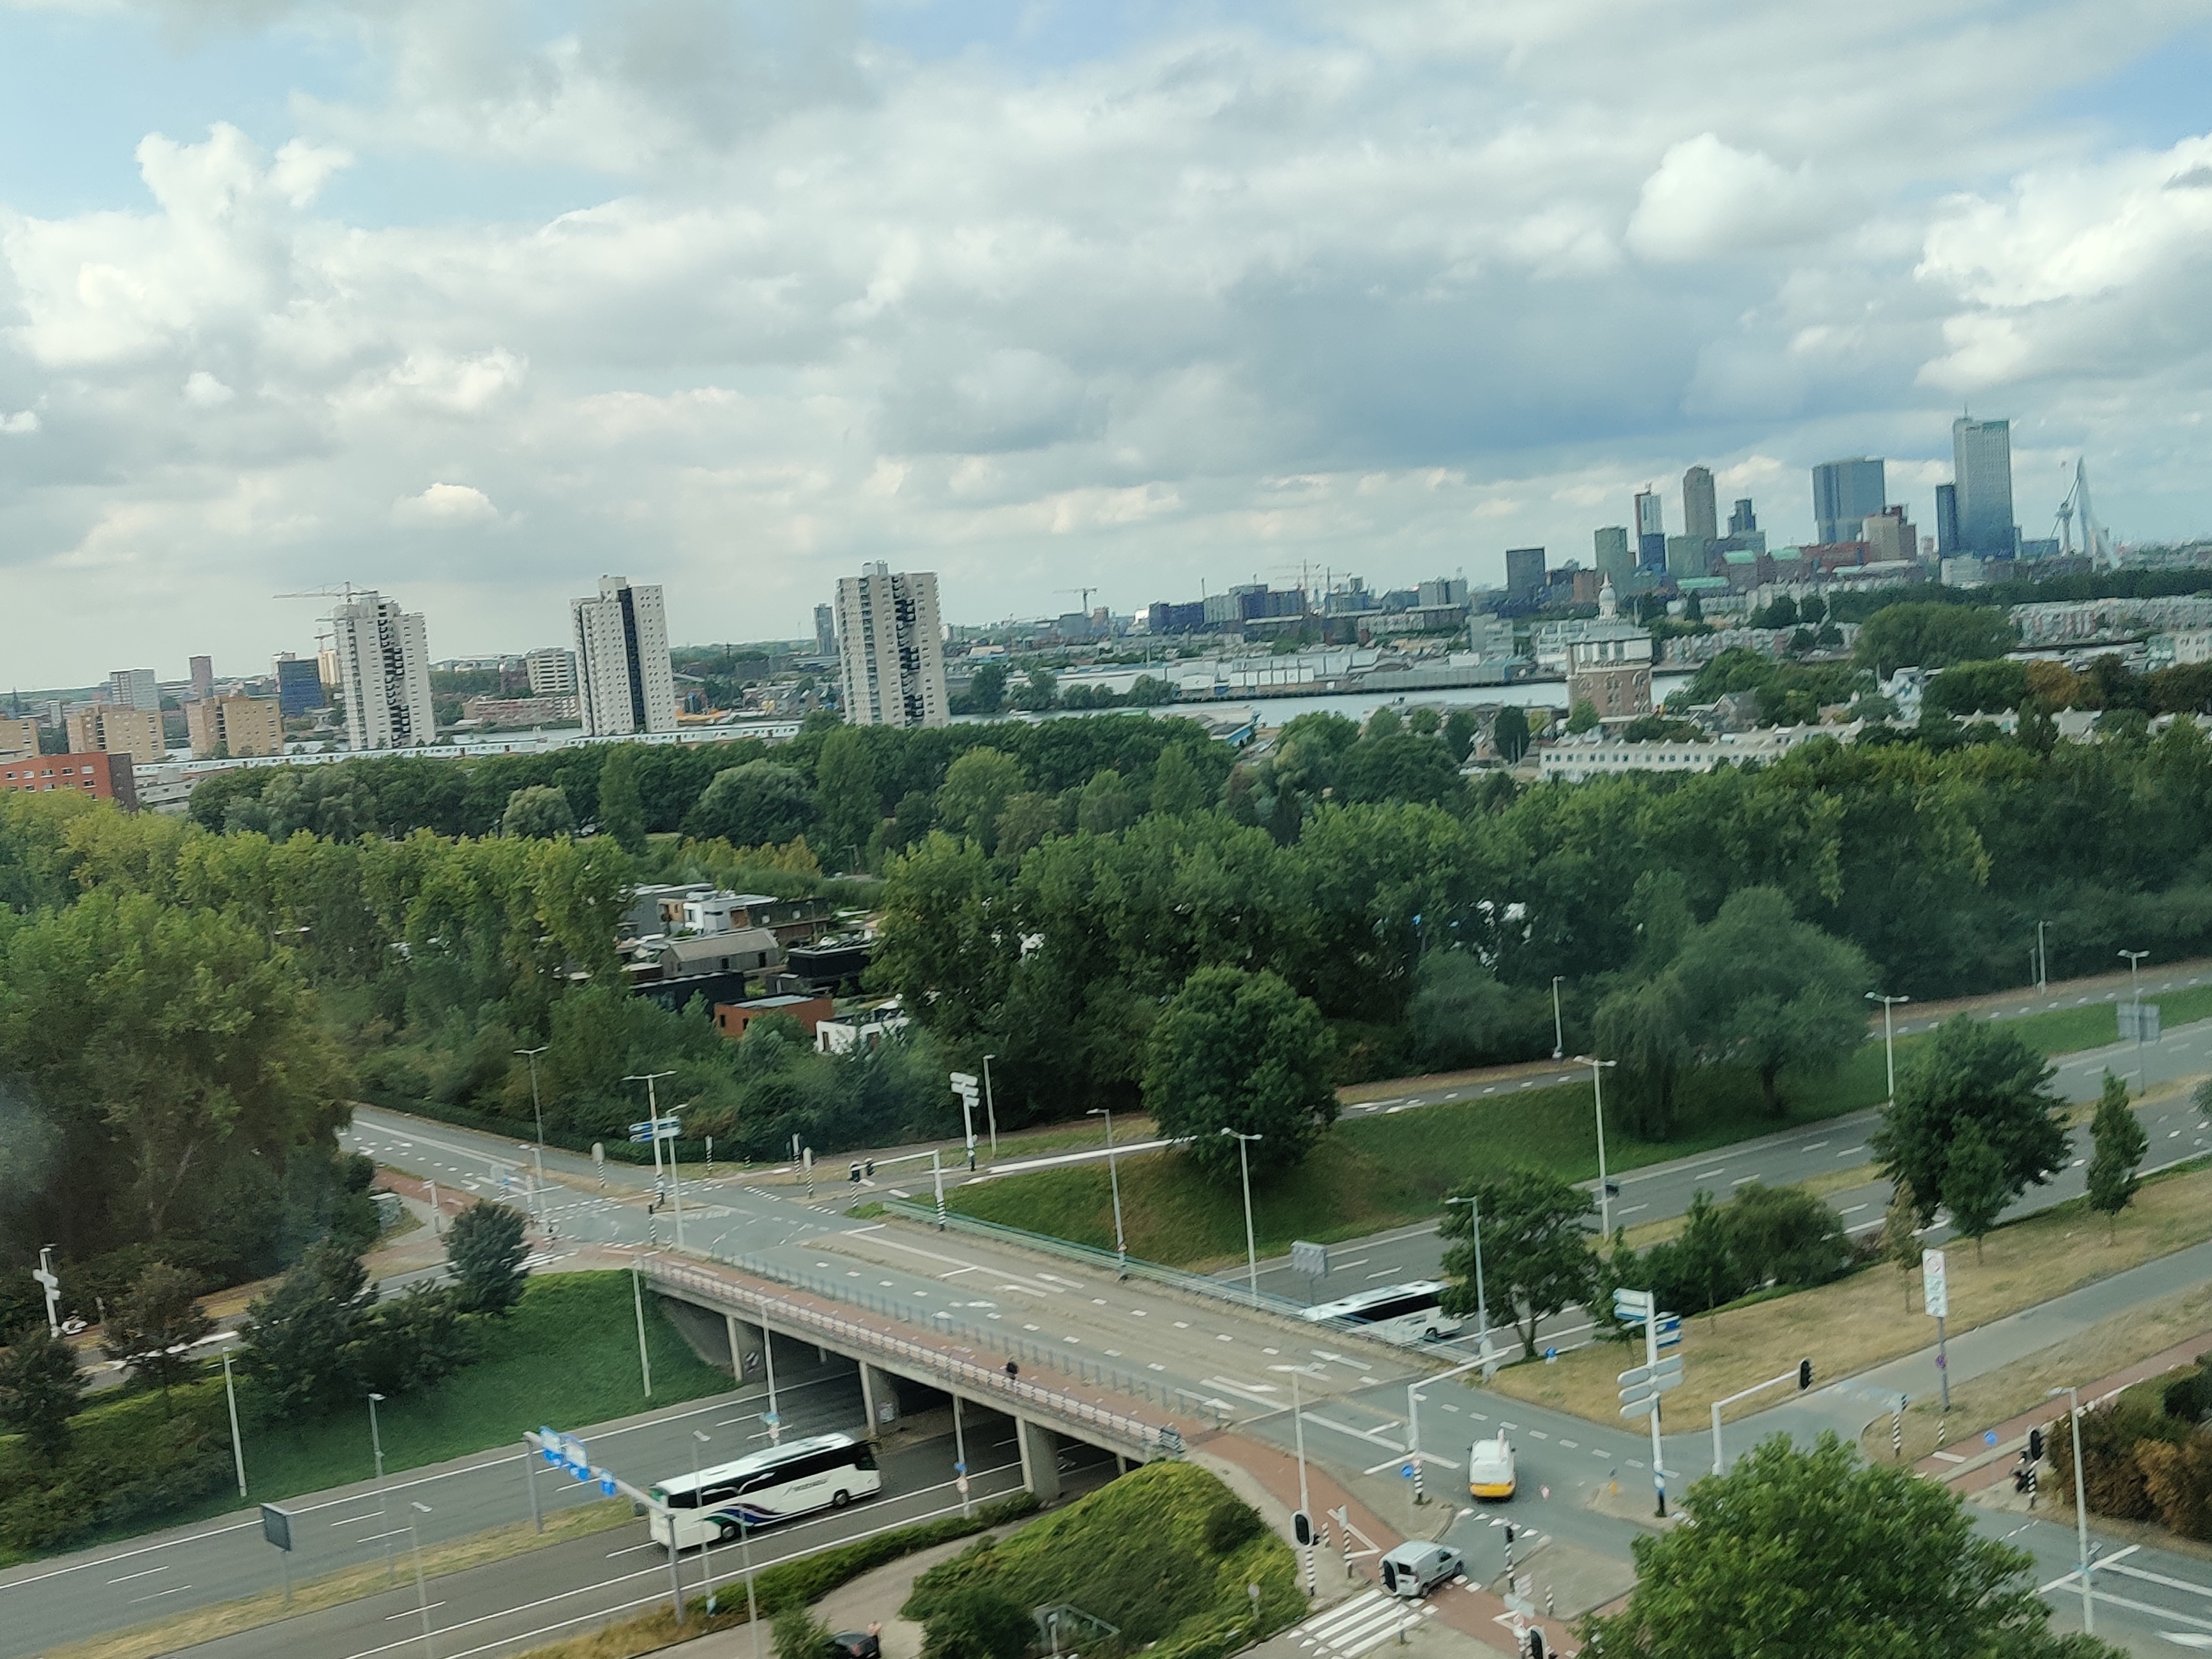 Picture of a place: Novotel Rotterdam Brainpark